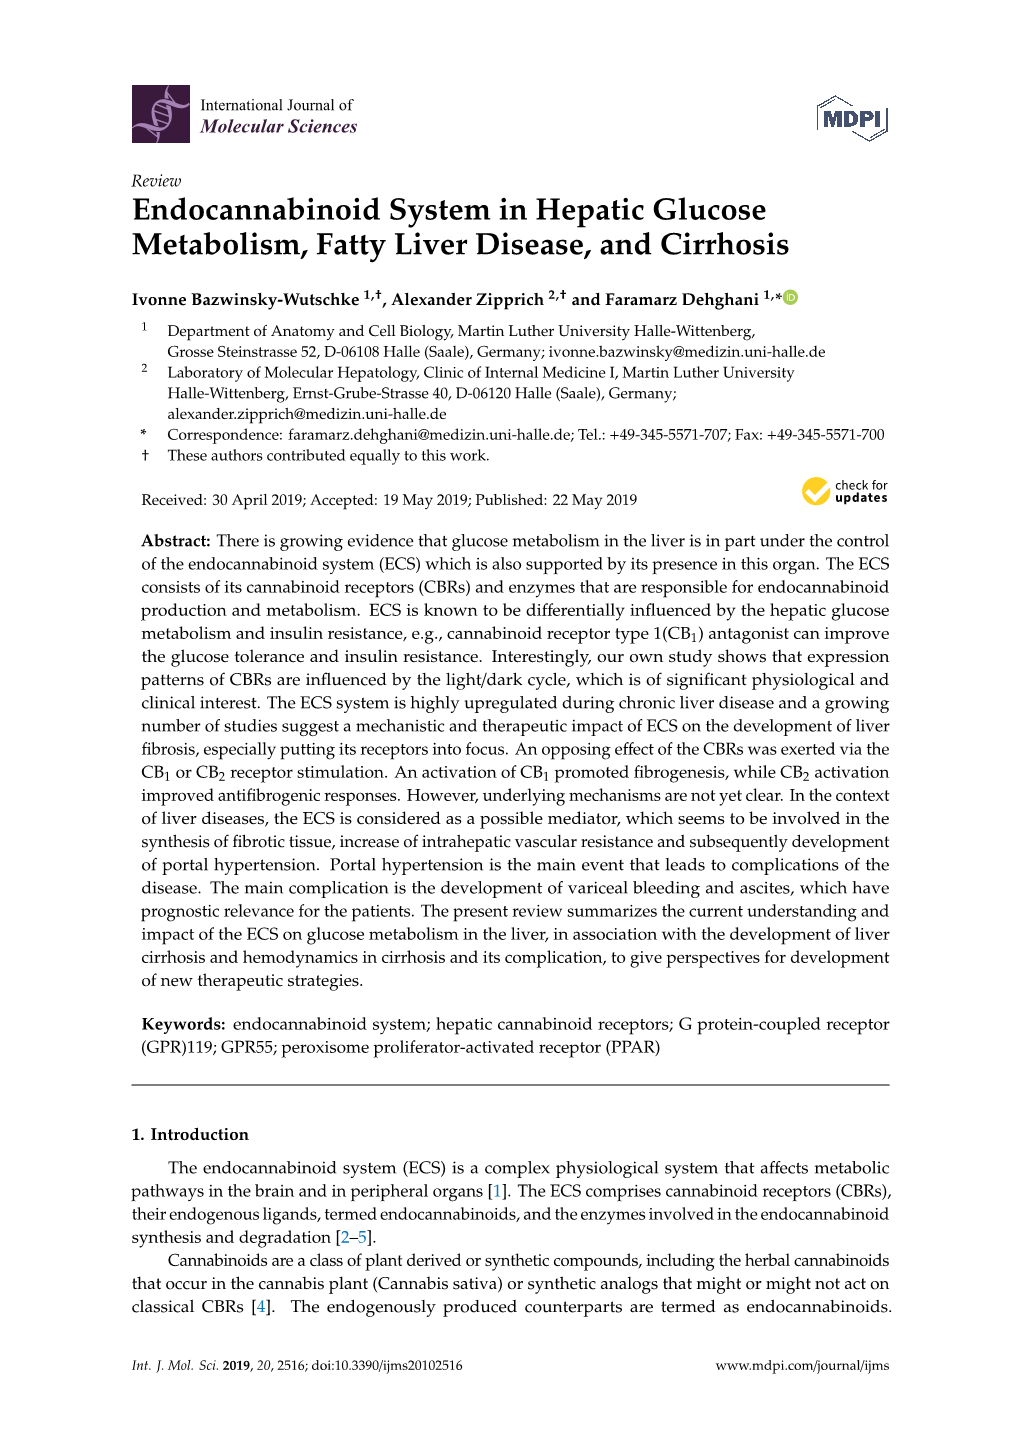 Endocannabinoid System in Hepatic Glucose Metabolism, Fatty Liver Disease, and Cirrhosis